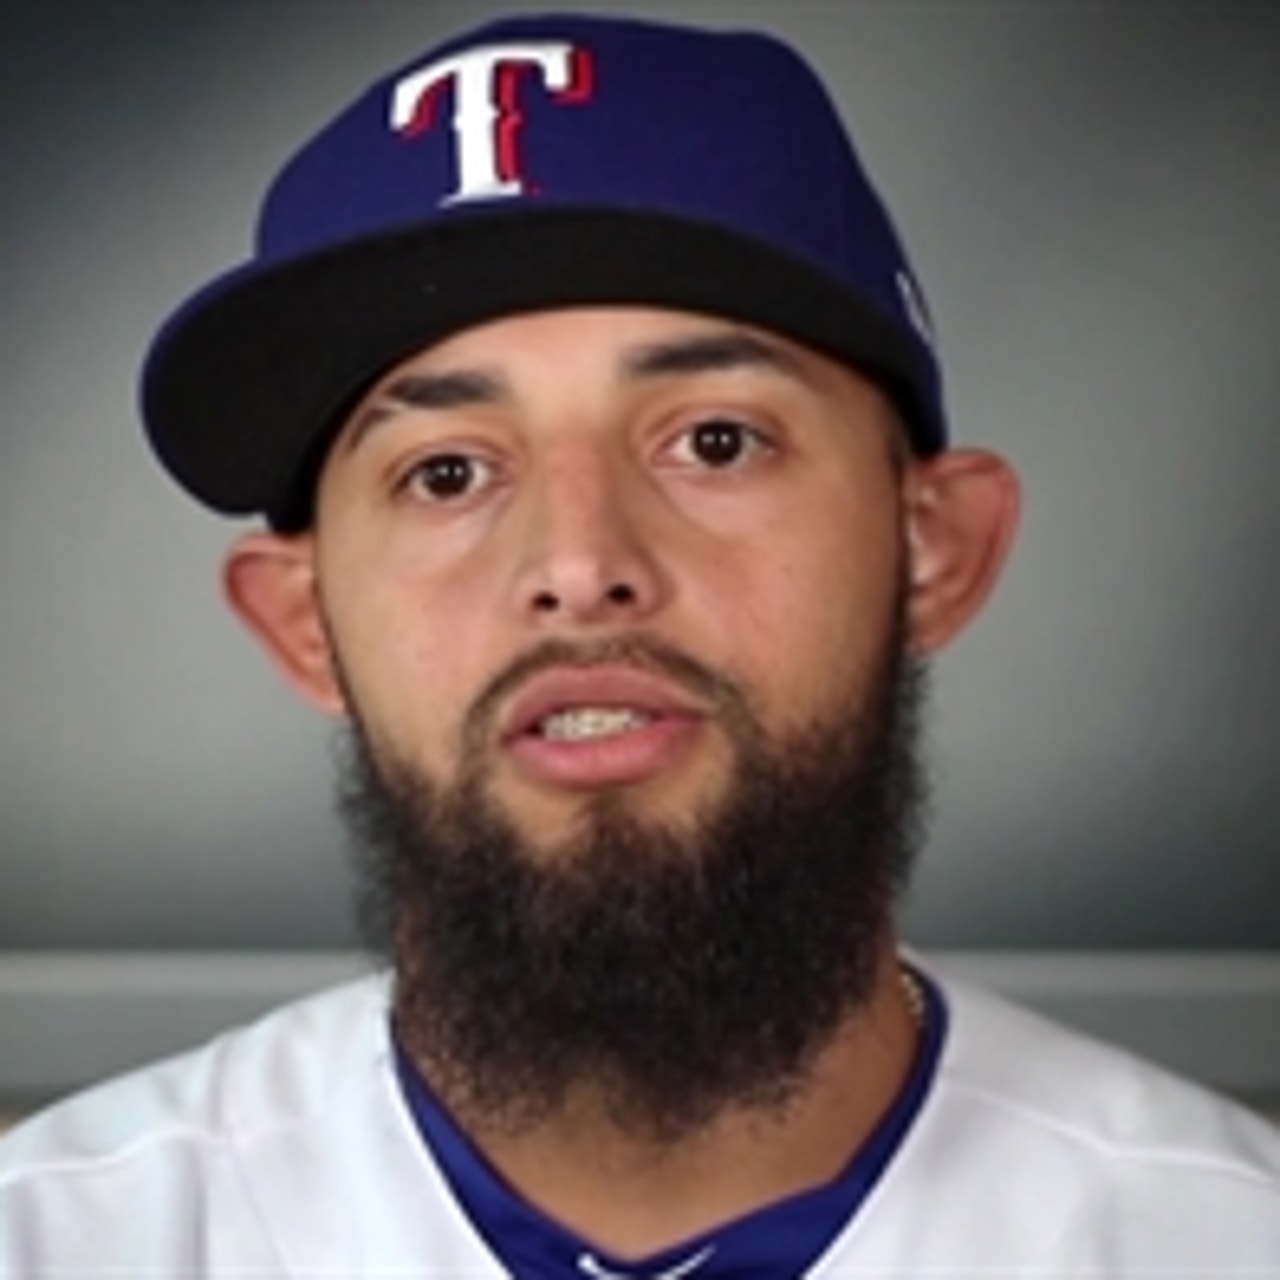 Rougned Odor on his chemistry with Elvis Andrus